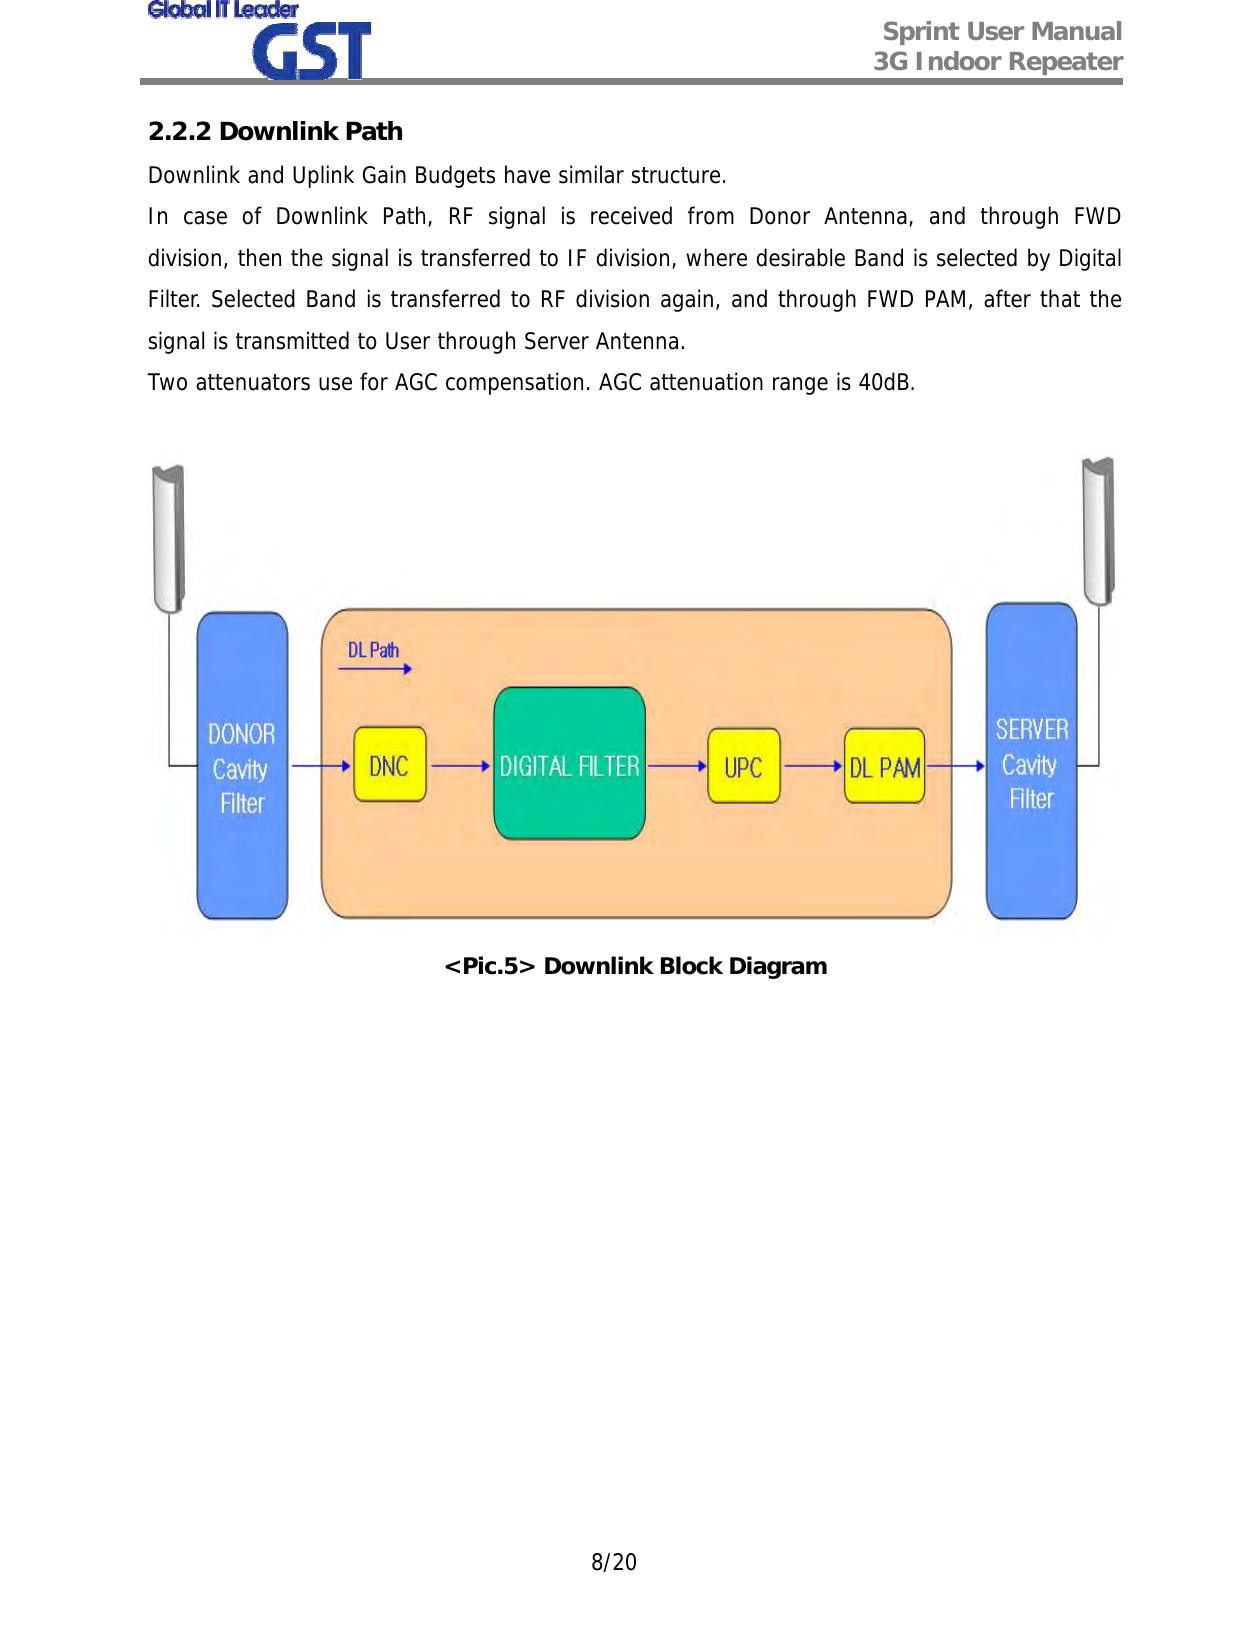  Sprint User Manual 3G Indoor Repeater   8/20 2.2.2 Downlink Path Downlink and Uplink Gain Budgets have similar structure. In case of Downlink Path, RF signal is received from Donor Antenna, and through FWD  division, then the signal is transferred to IF division, where desirable Band is selected by Digital Filter. Selected Band is transferred to RF division again, and through FWD PAM, after that the signal is transmitted to User through Server Antenna. Two attenuators use for AGC compensation. AGC attenuation range is 40dB.   &lt;Pic.5&gt; Downlink Block Diagram             